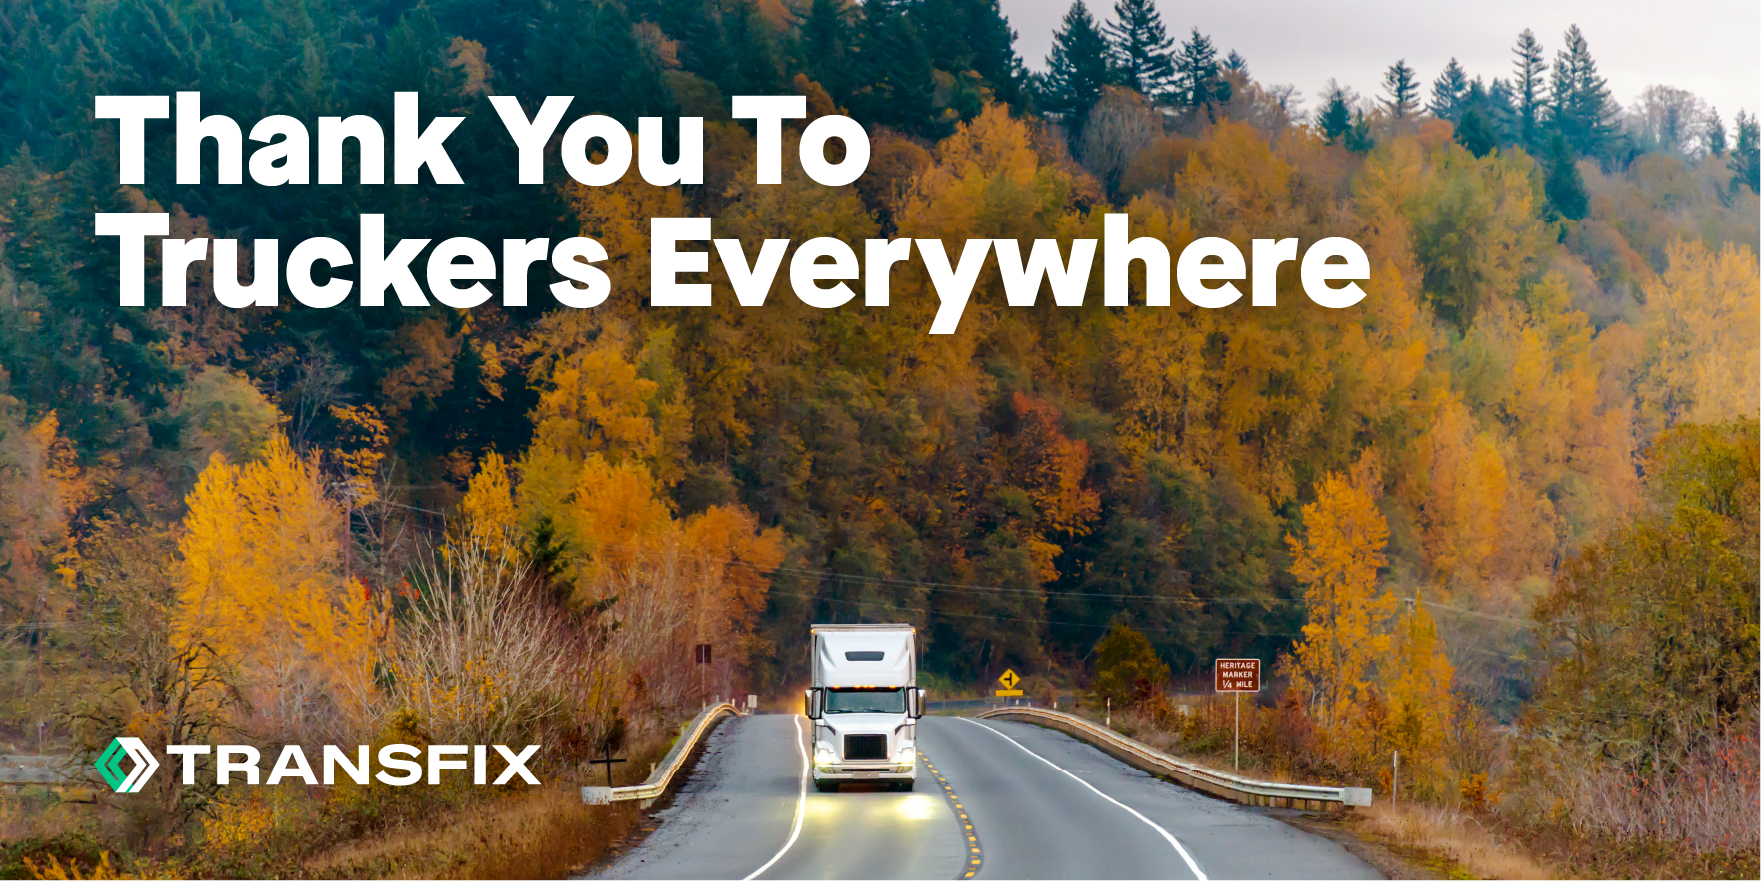 Thank You to Truckers Everywhere